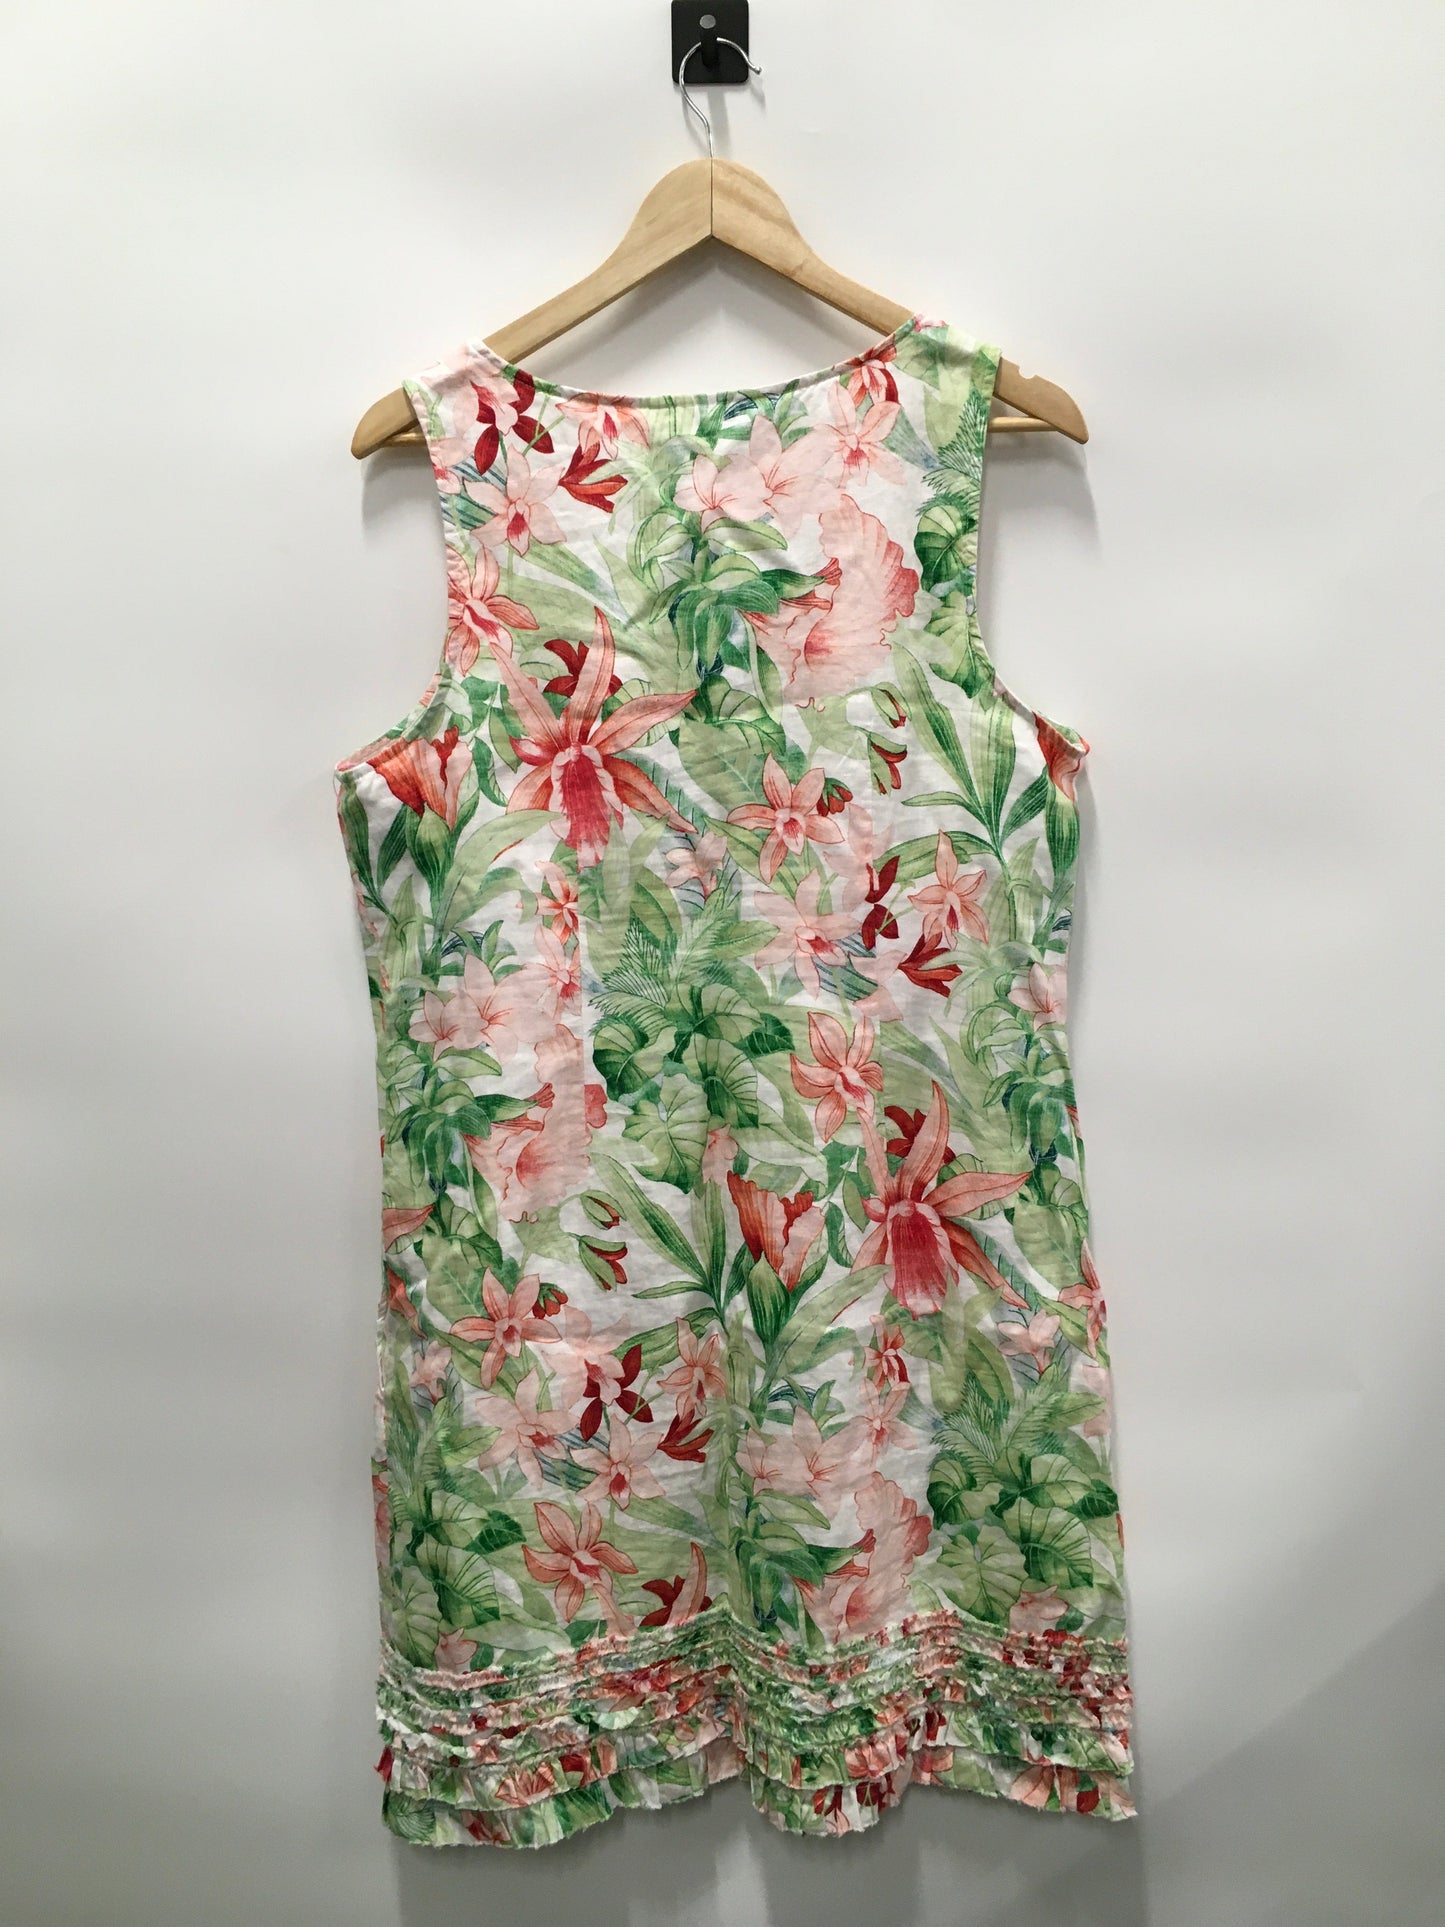 Floral Print Dress Casual Short Tommy Bahama, Size L